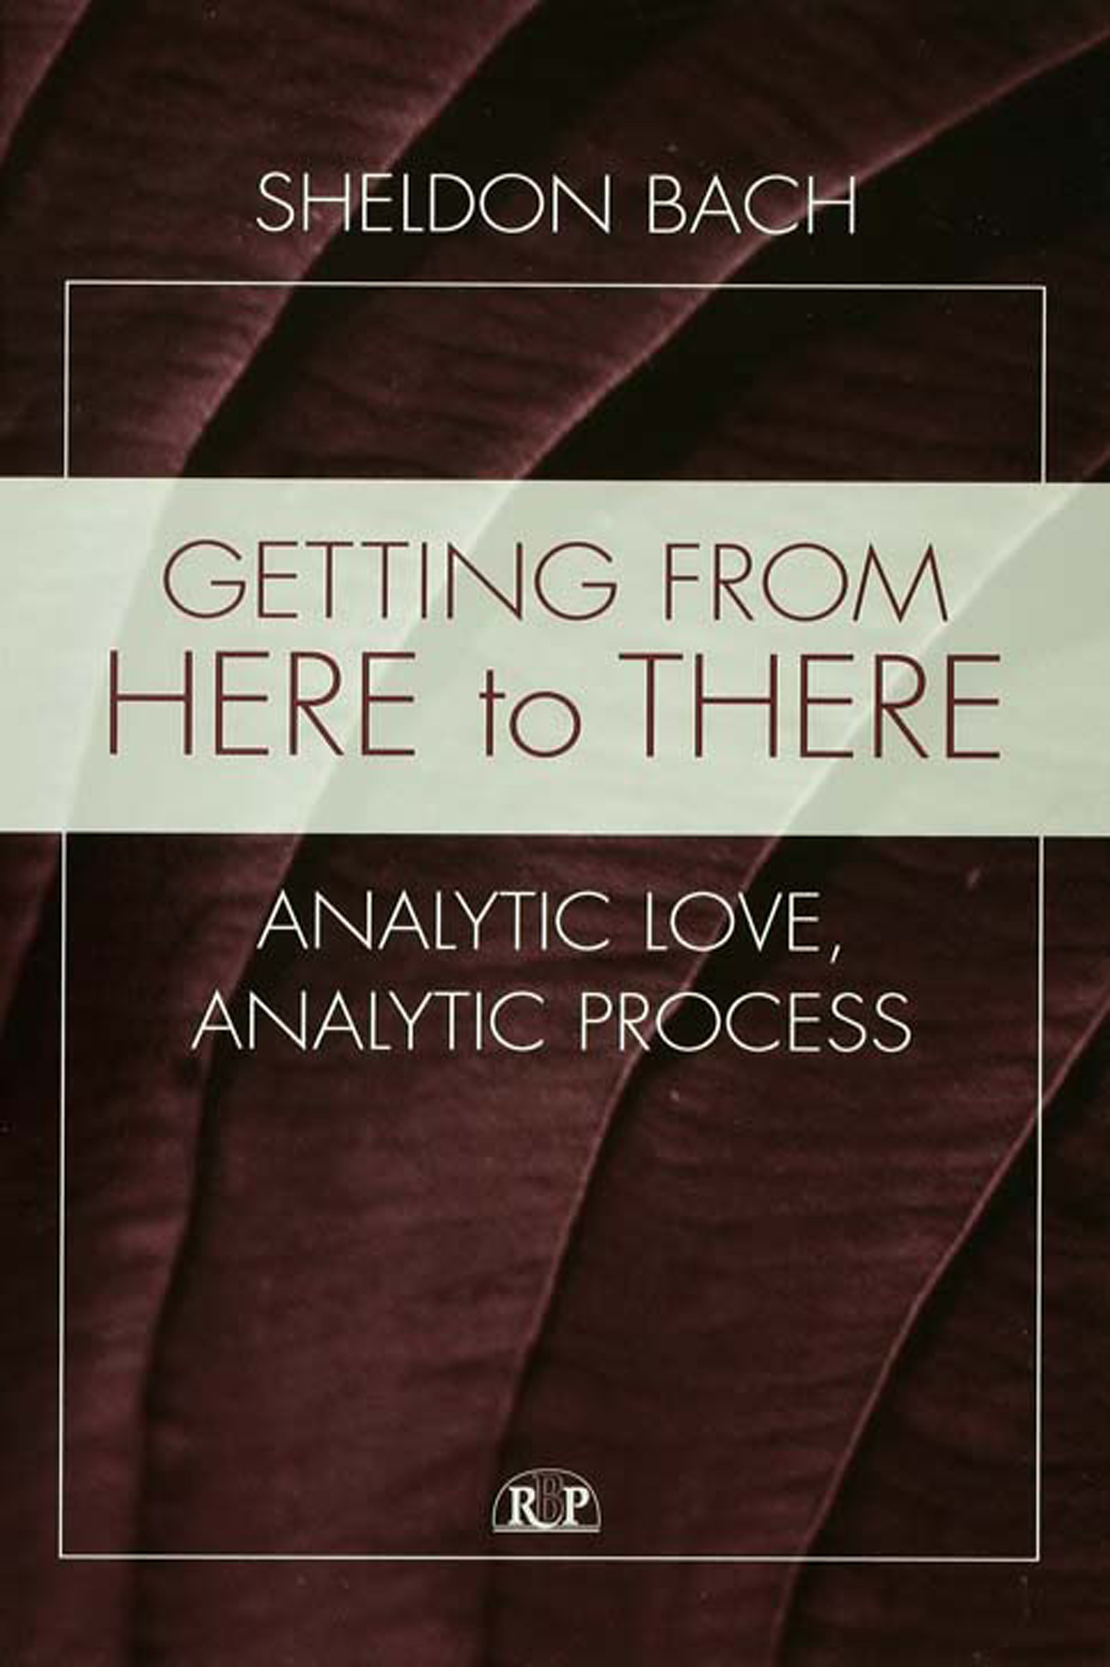 GETTING FROM HERE TO THERE Analytic Love Analytic Process Sheldon Bach 2006 - photo 1